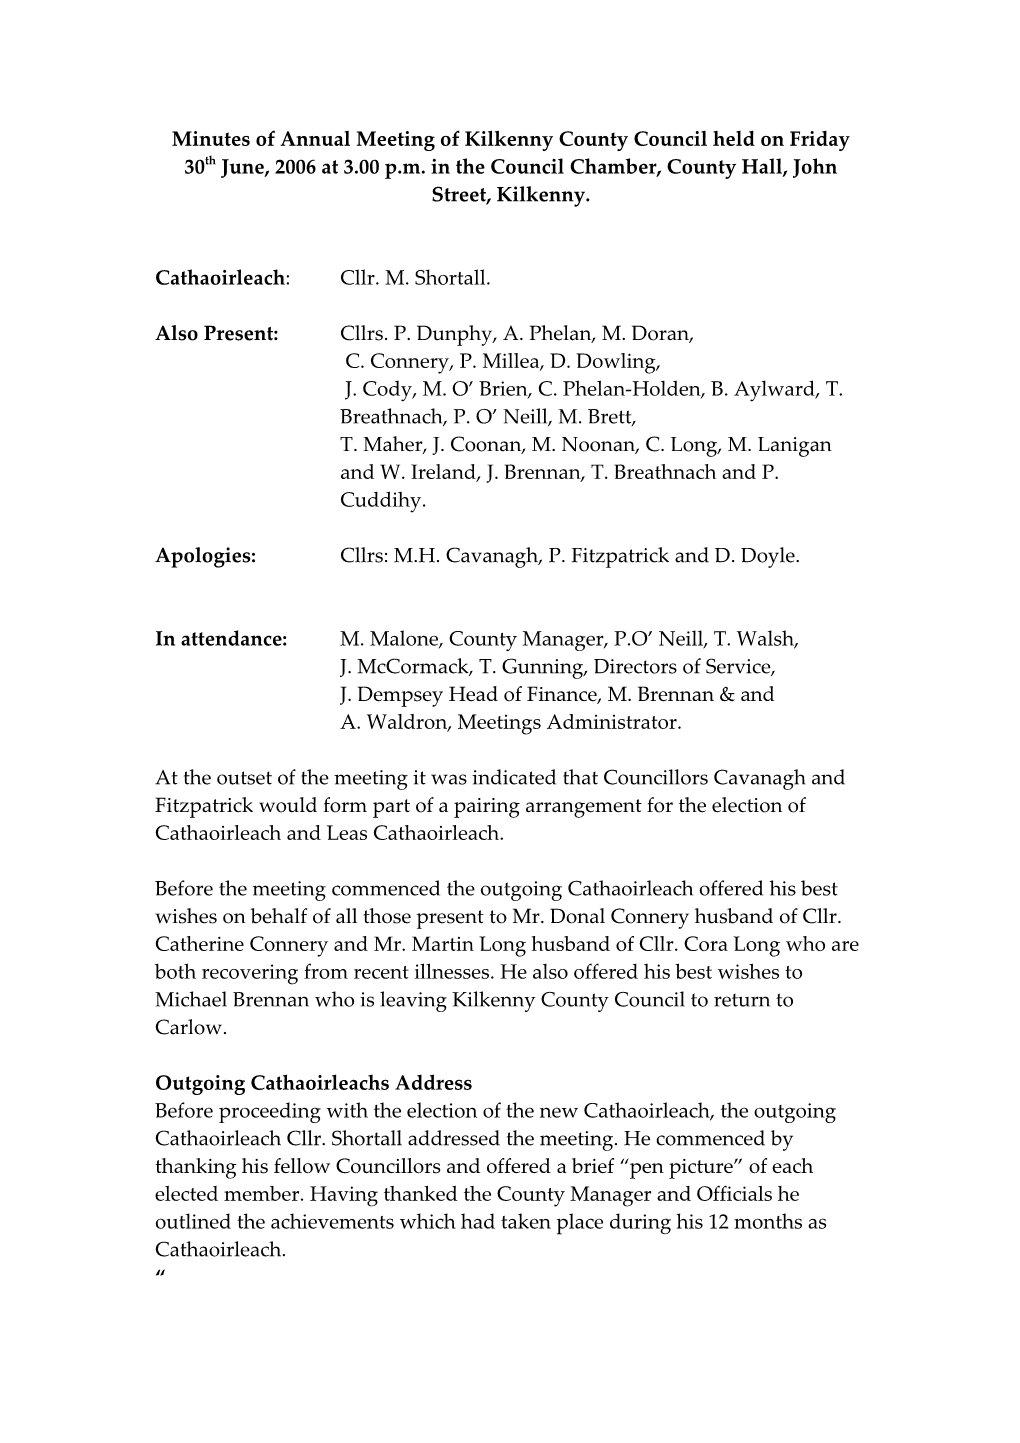 Minutes of Annual Meeting of Kilkenny County Council Held on Friday 30Th June, 2006 at 3